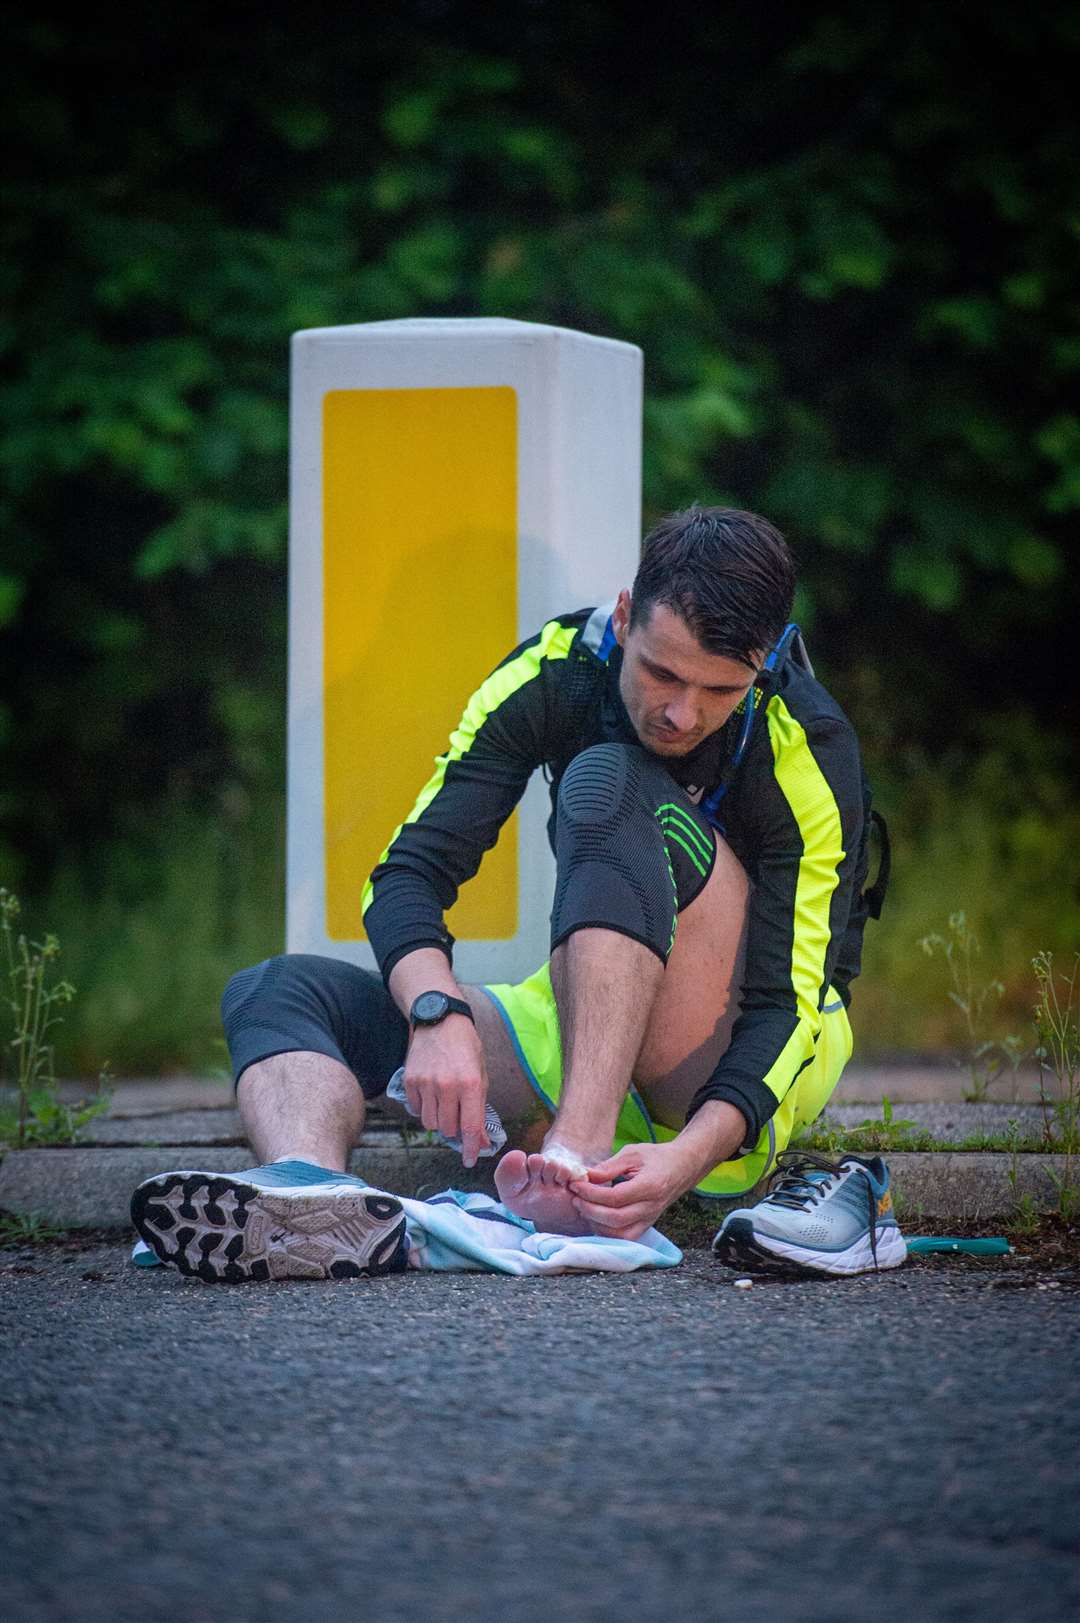 The Brora Rangers Team manager, Steven Mackay ran an ultra marthon of 80 miles in 24hrs to raise money for MFR cash for kids with the support of Craig Campbell and David Hind...Steven Mackay macking running repairs...Picture: Callum Mackay..